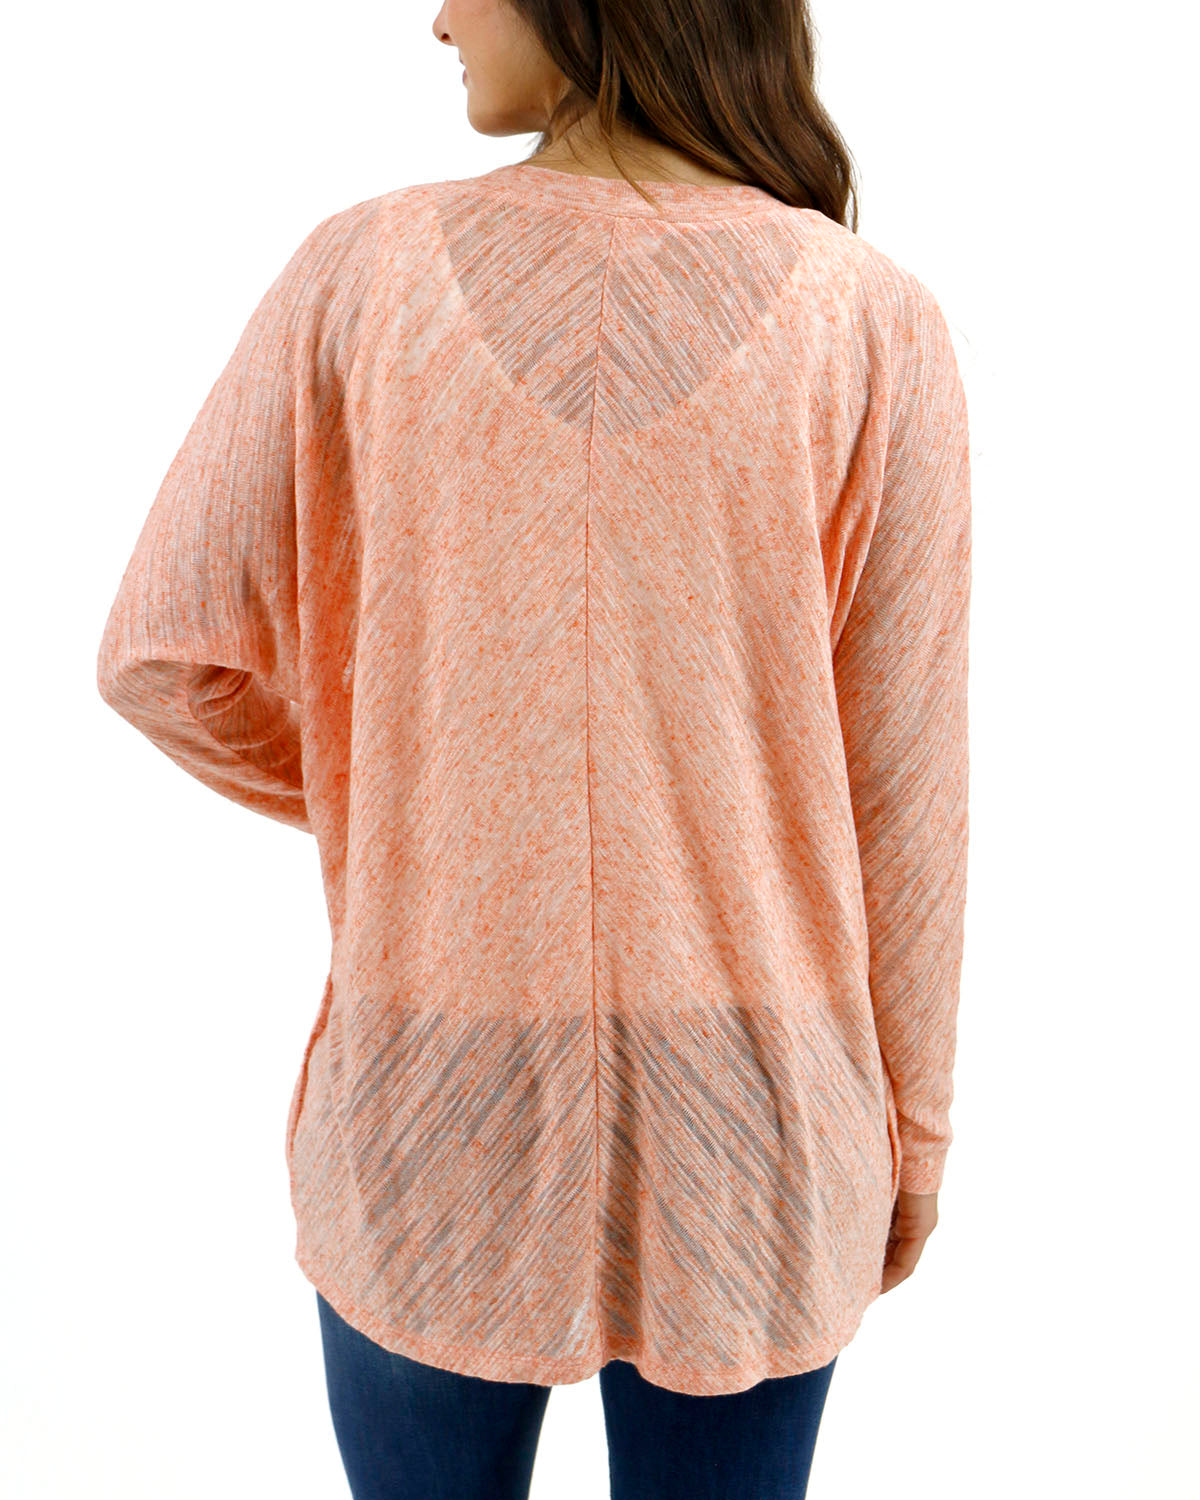 Airy Cocoon Slub SALE - - Dreamsicle Cardigan in and Lace FINAL Grace